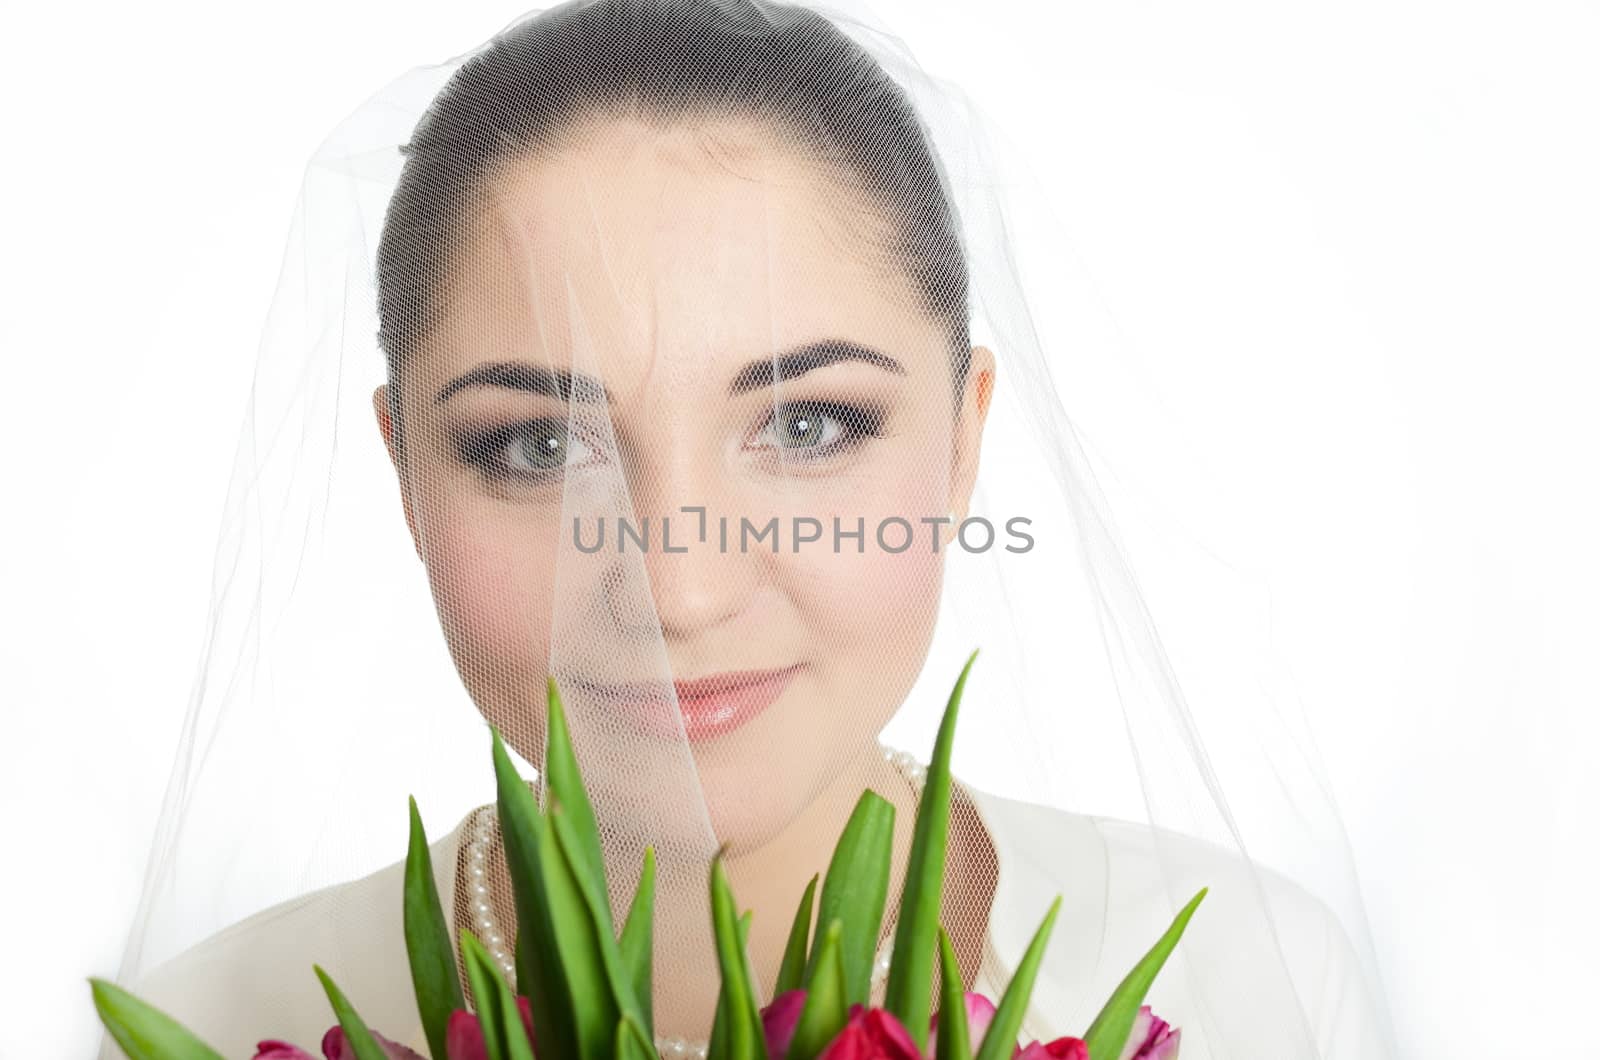 Female model, face covered with veil. Bride holds tulips bouquet. Portrait in studio with white background.
